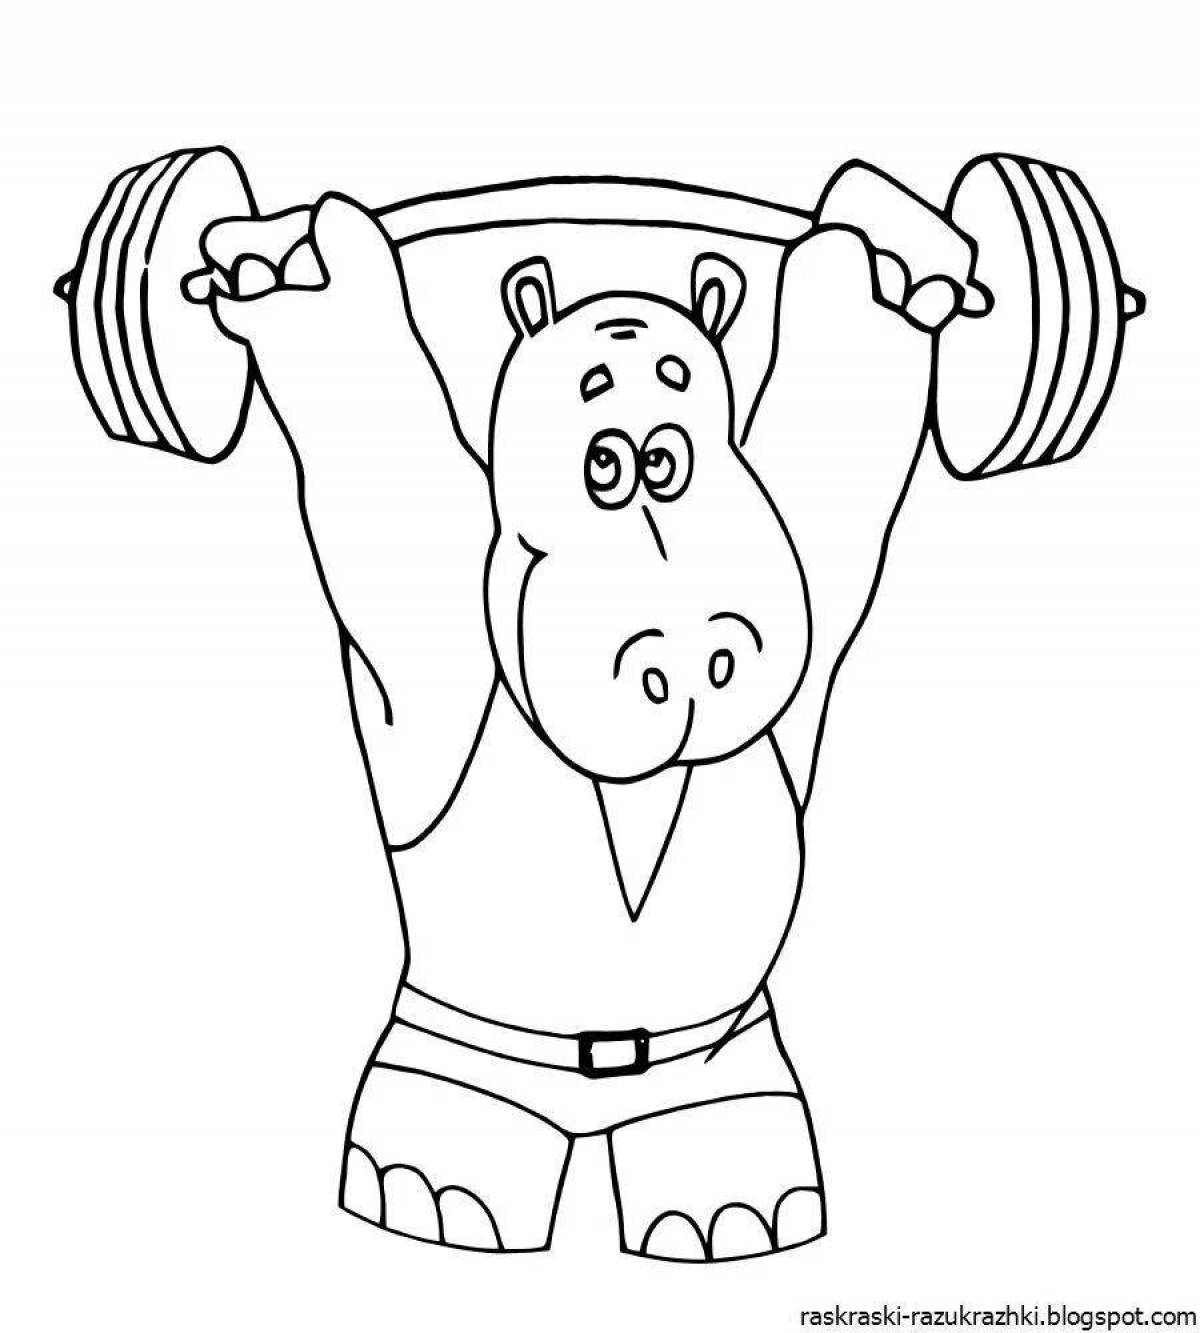 Creative healthy lifestyle coloring page